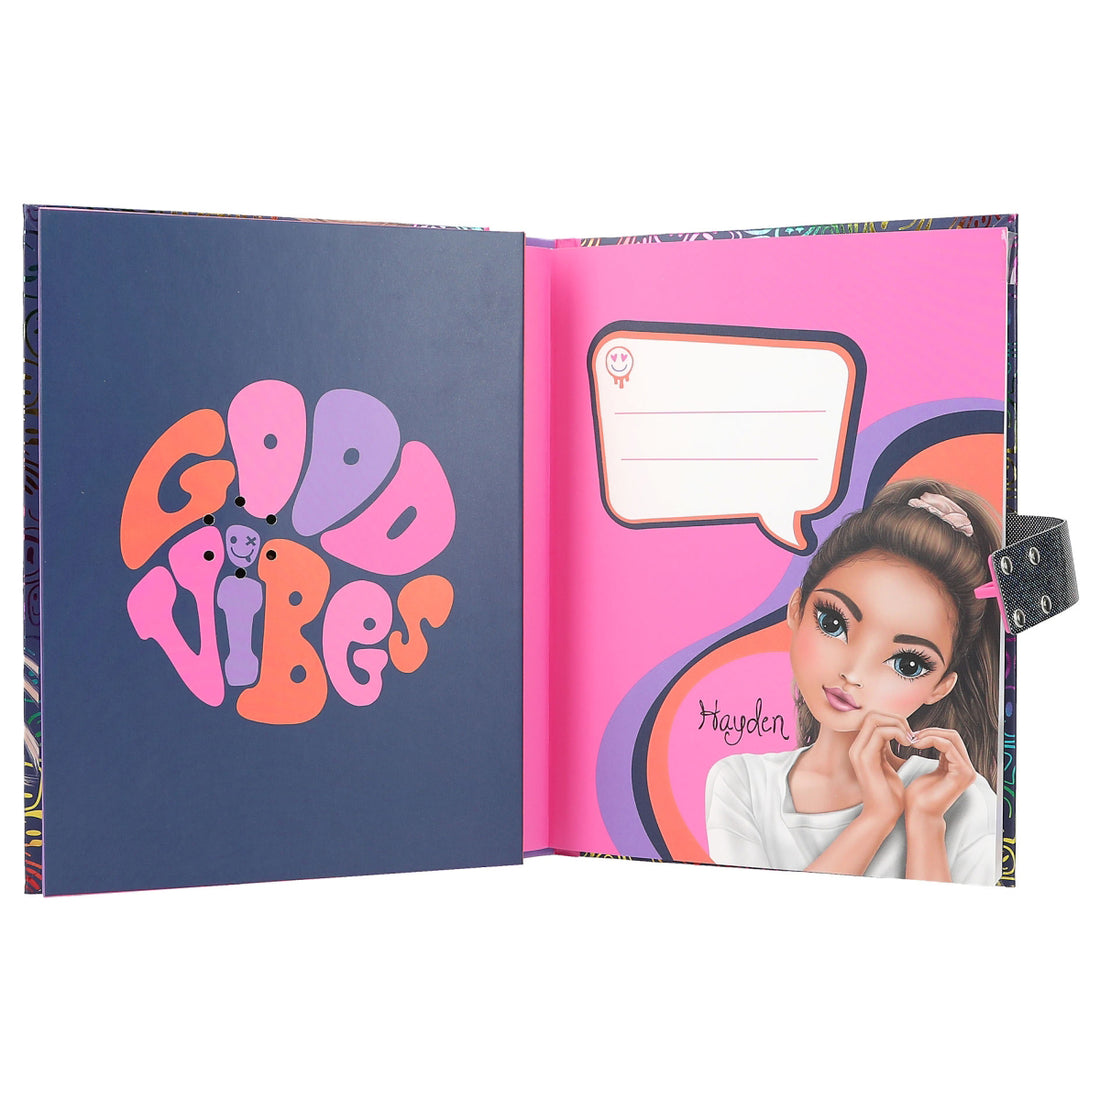 depesche-topmodel-diary-with-code-and-sound-night-light-depe-0012971